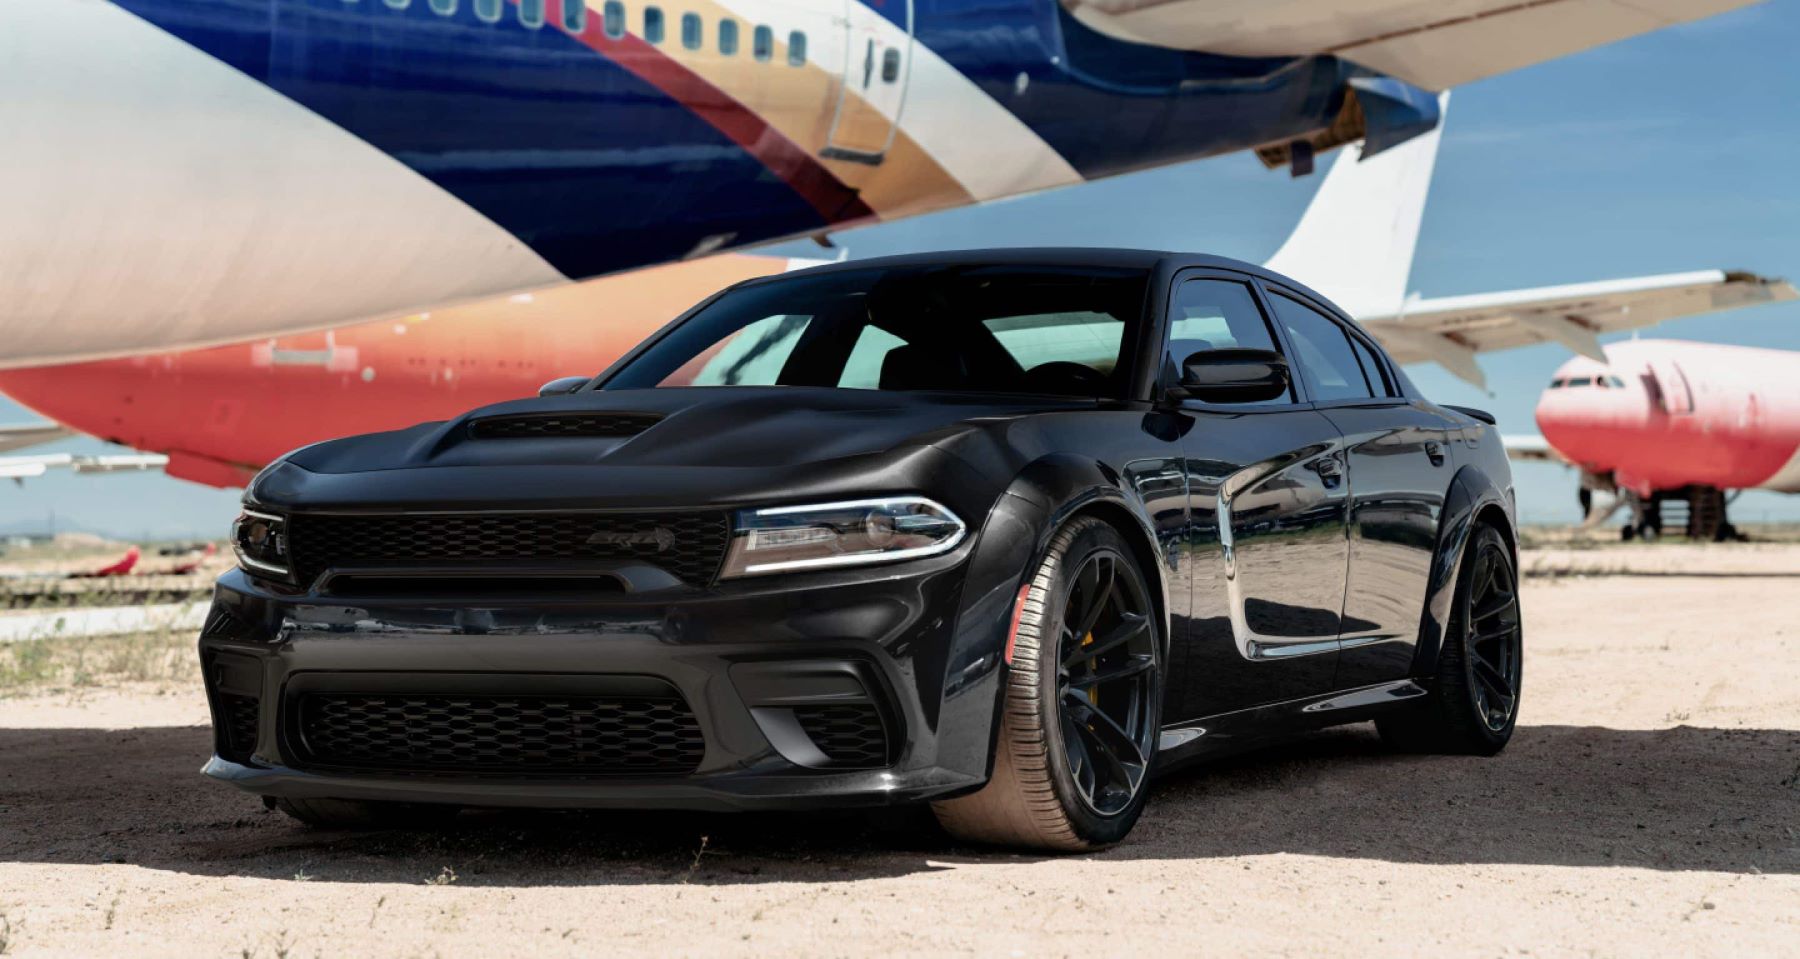 2022 Dodge Charger Jailbreak parked at a landing bay at an airport